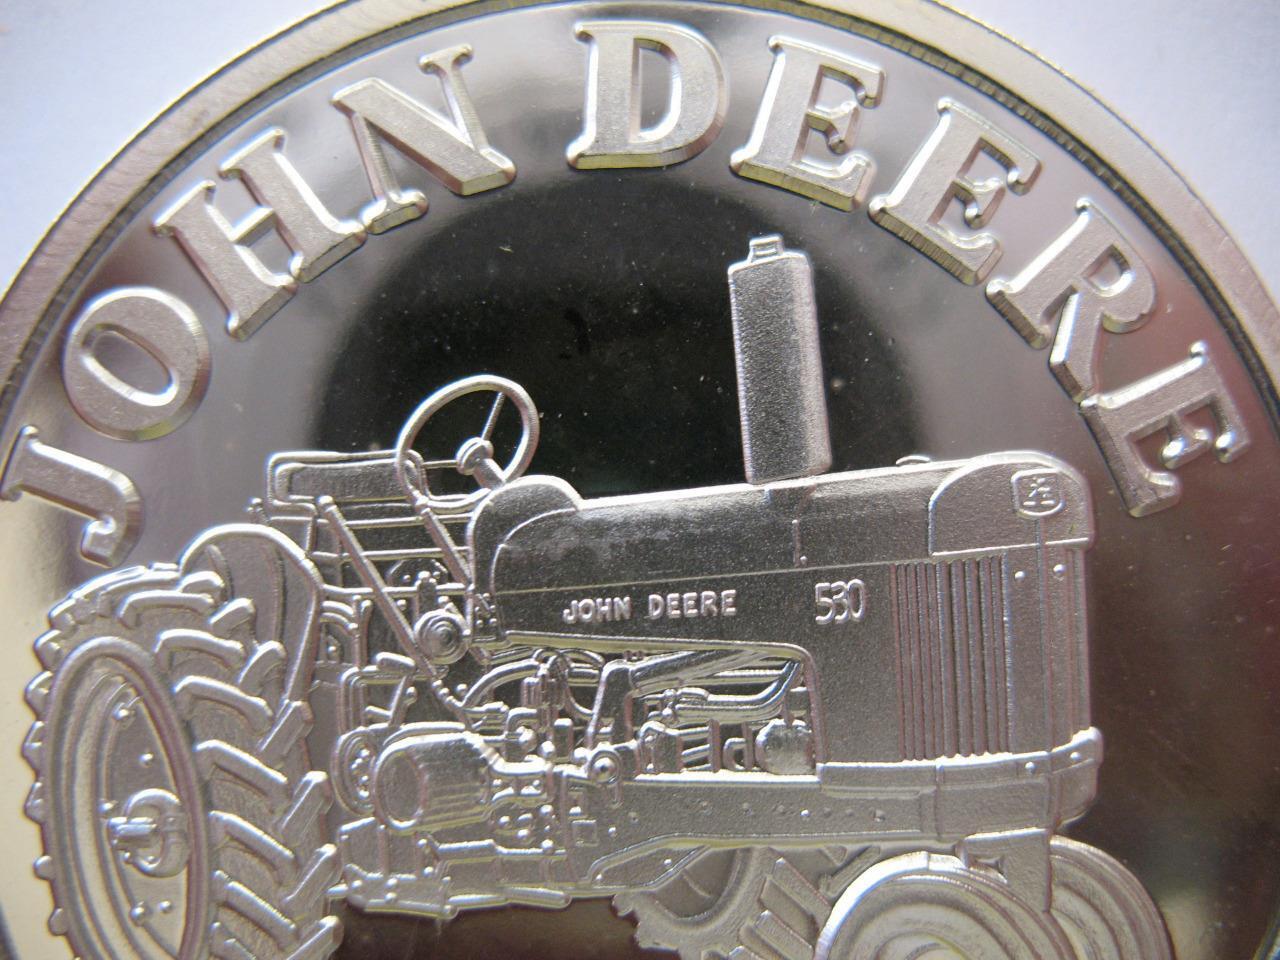 1-OZ.JOHN DEERE MODEL 530 TRACTOR CHRISTMAS GIFT.999 PROOF EDT SILVER COIN+GOLD